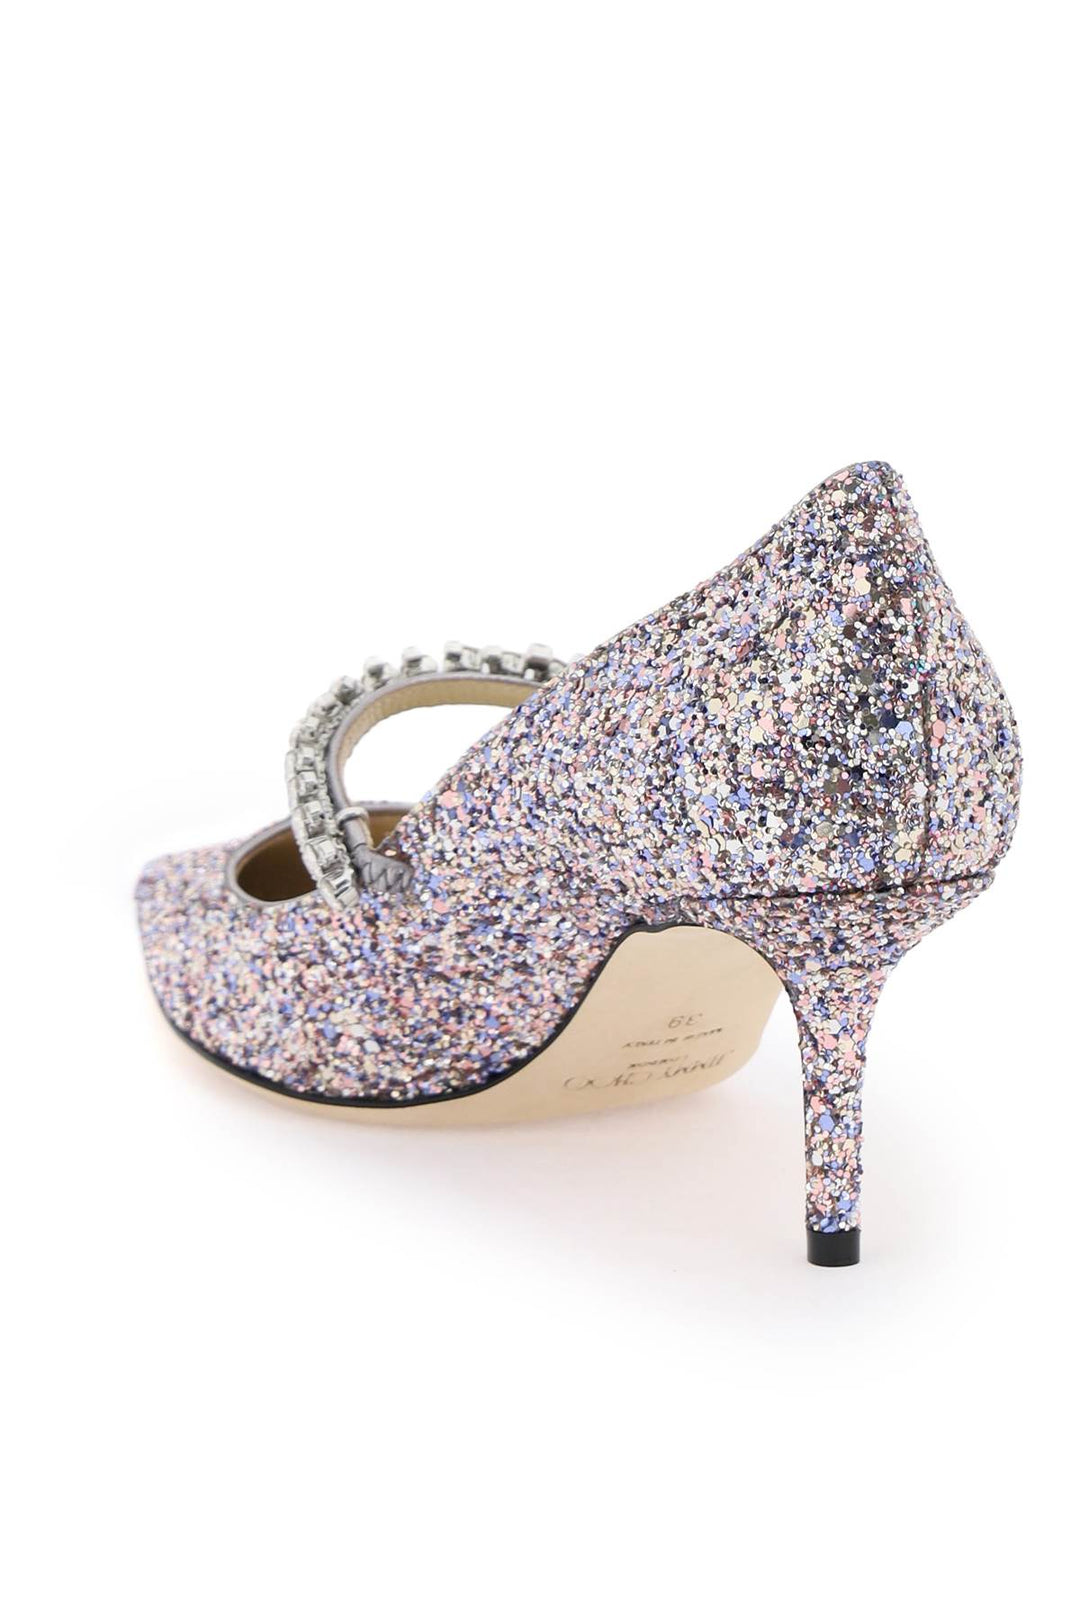 Jimmy Choo Bing 65 Pumps With Glitter And Crystals   Rosa